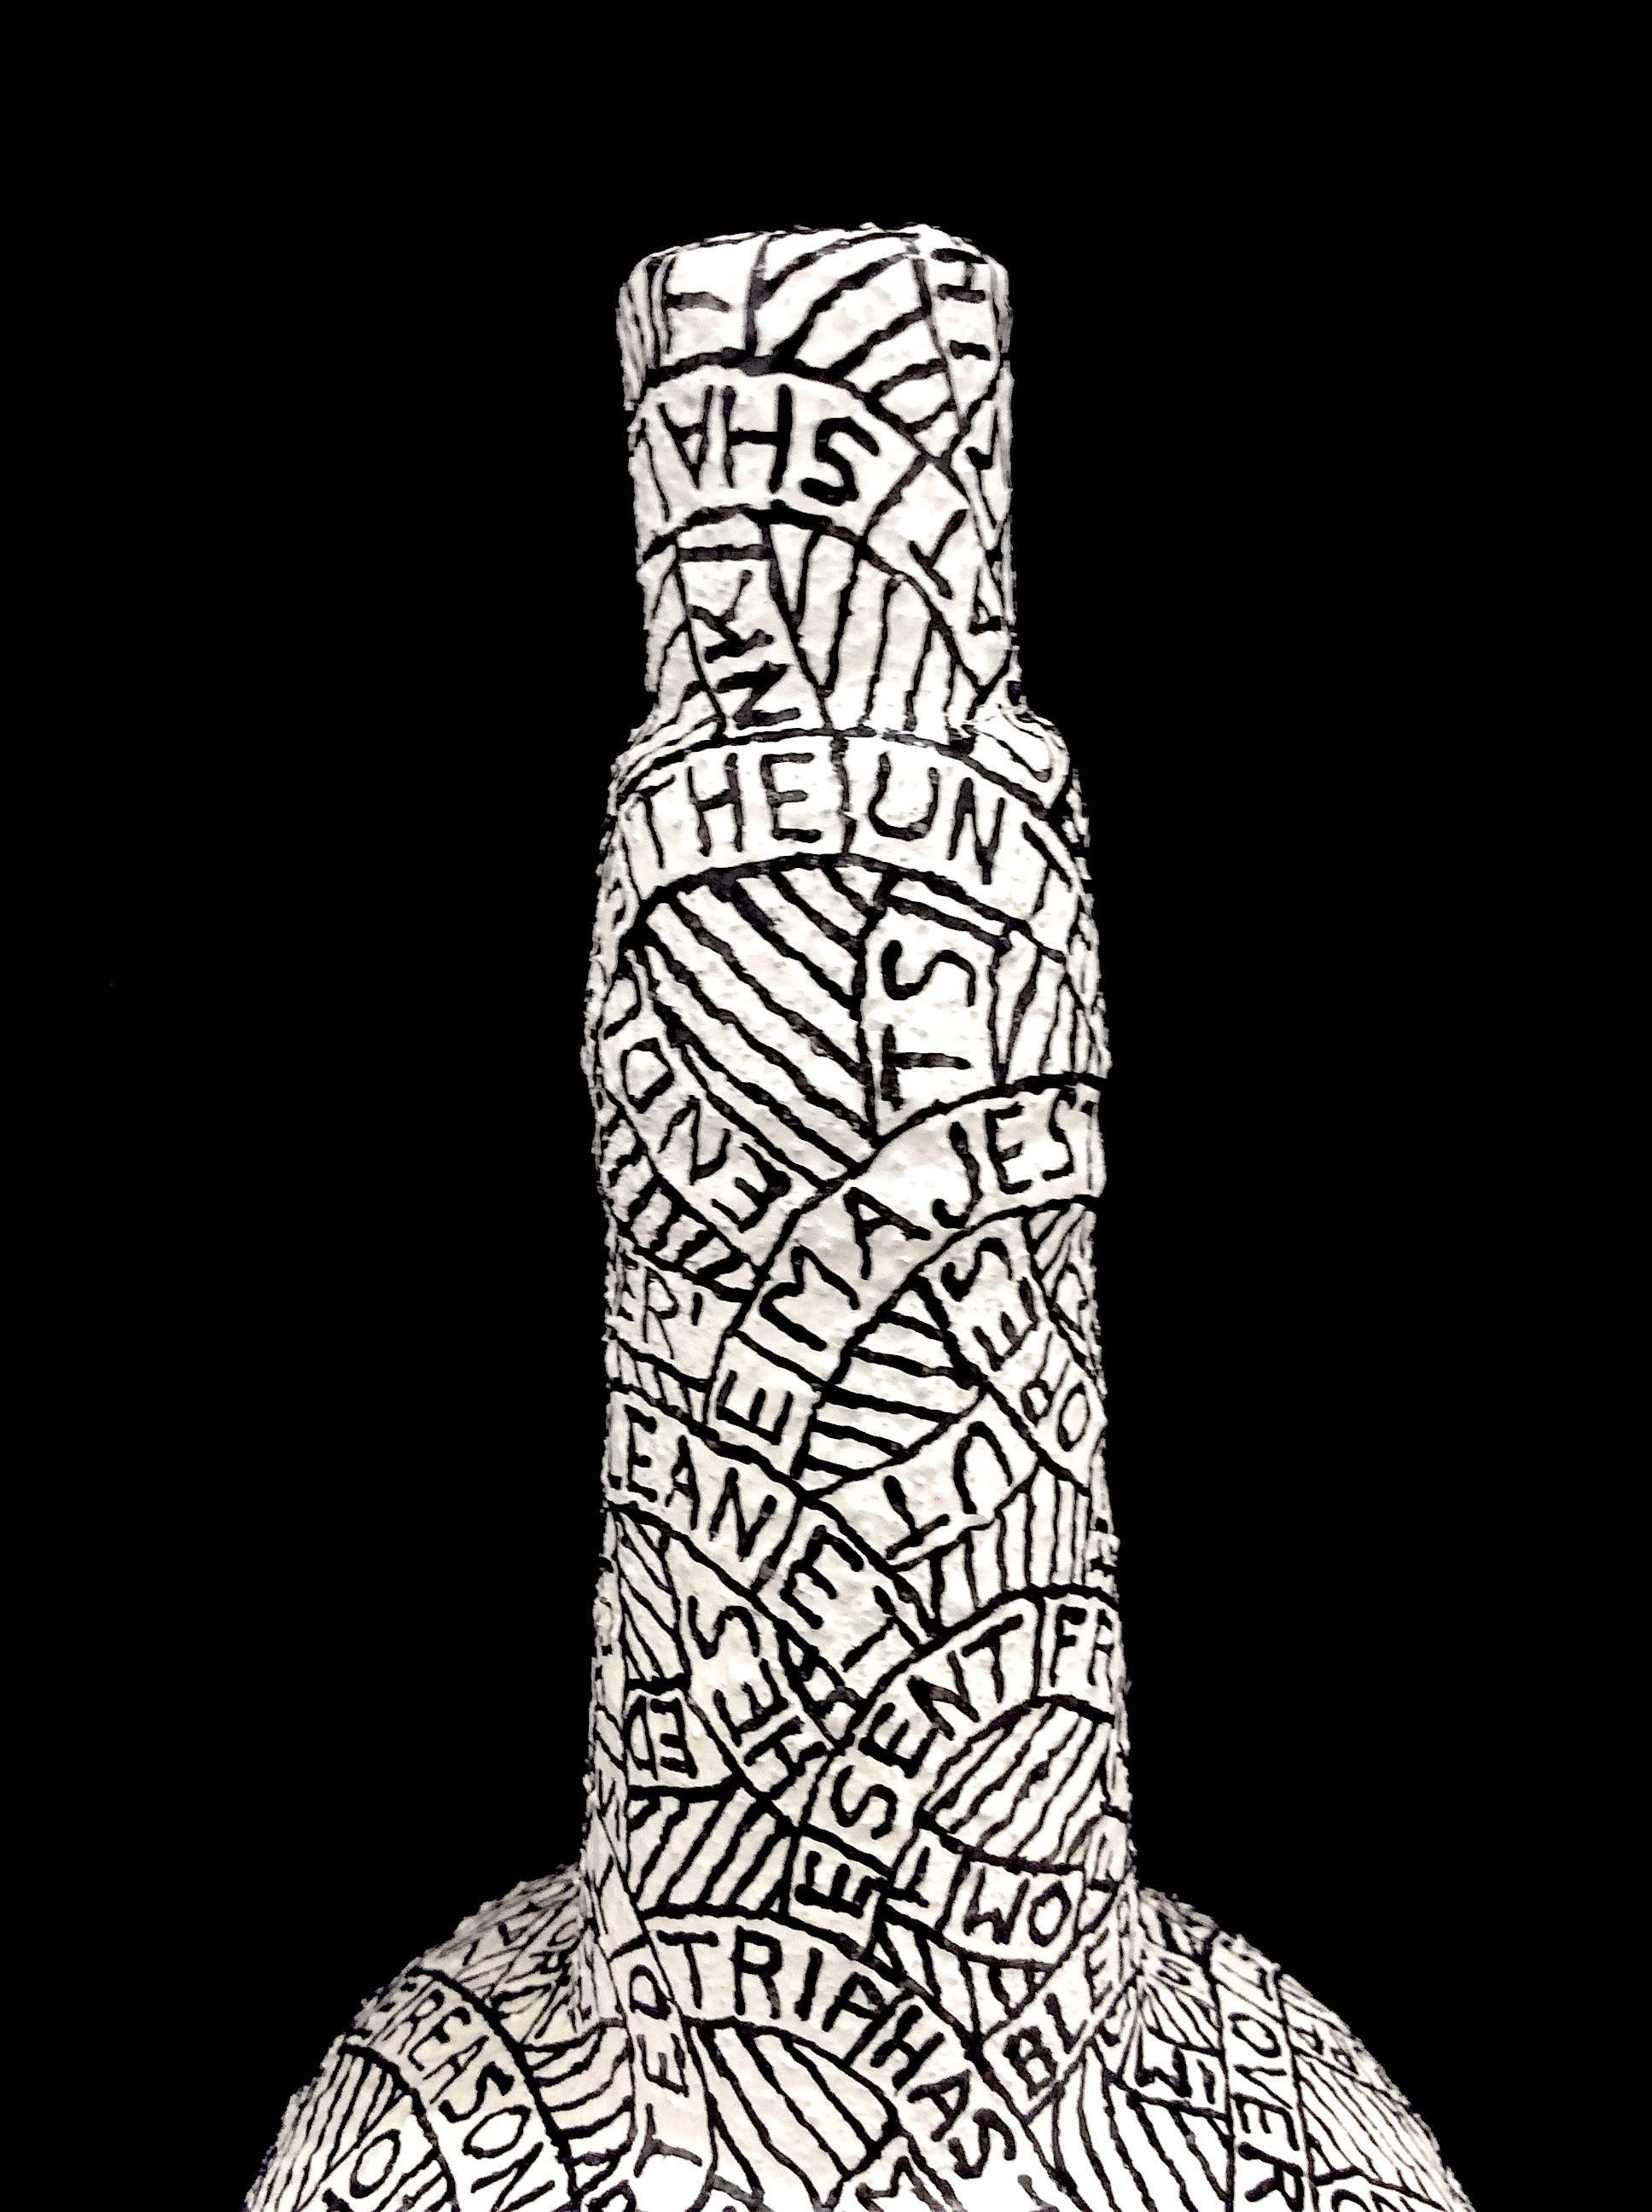 Plaster, sand, & paint on found object
12 x 4 x 4 inches

This black and white sculpture was created by Hudson Valley-based artist Paul Katz, whose process involves coating found objects in plaster, sand, & paint. The inscription which coats the